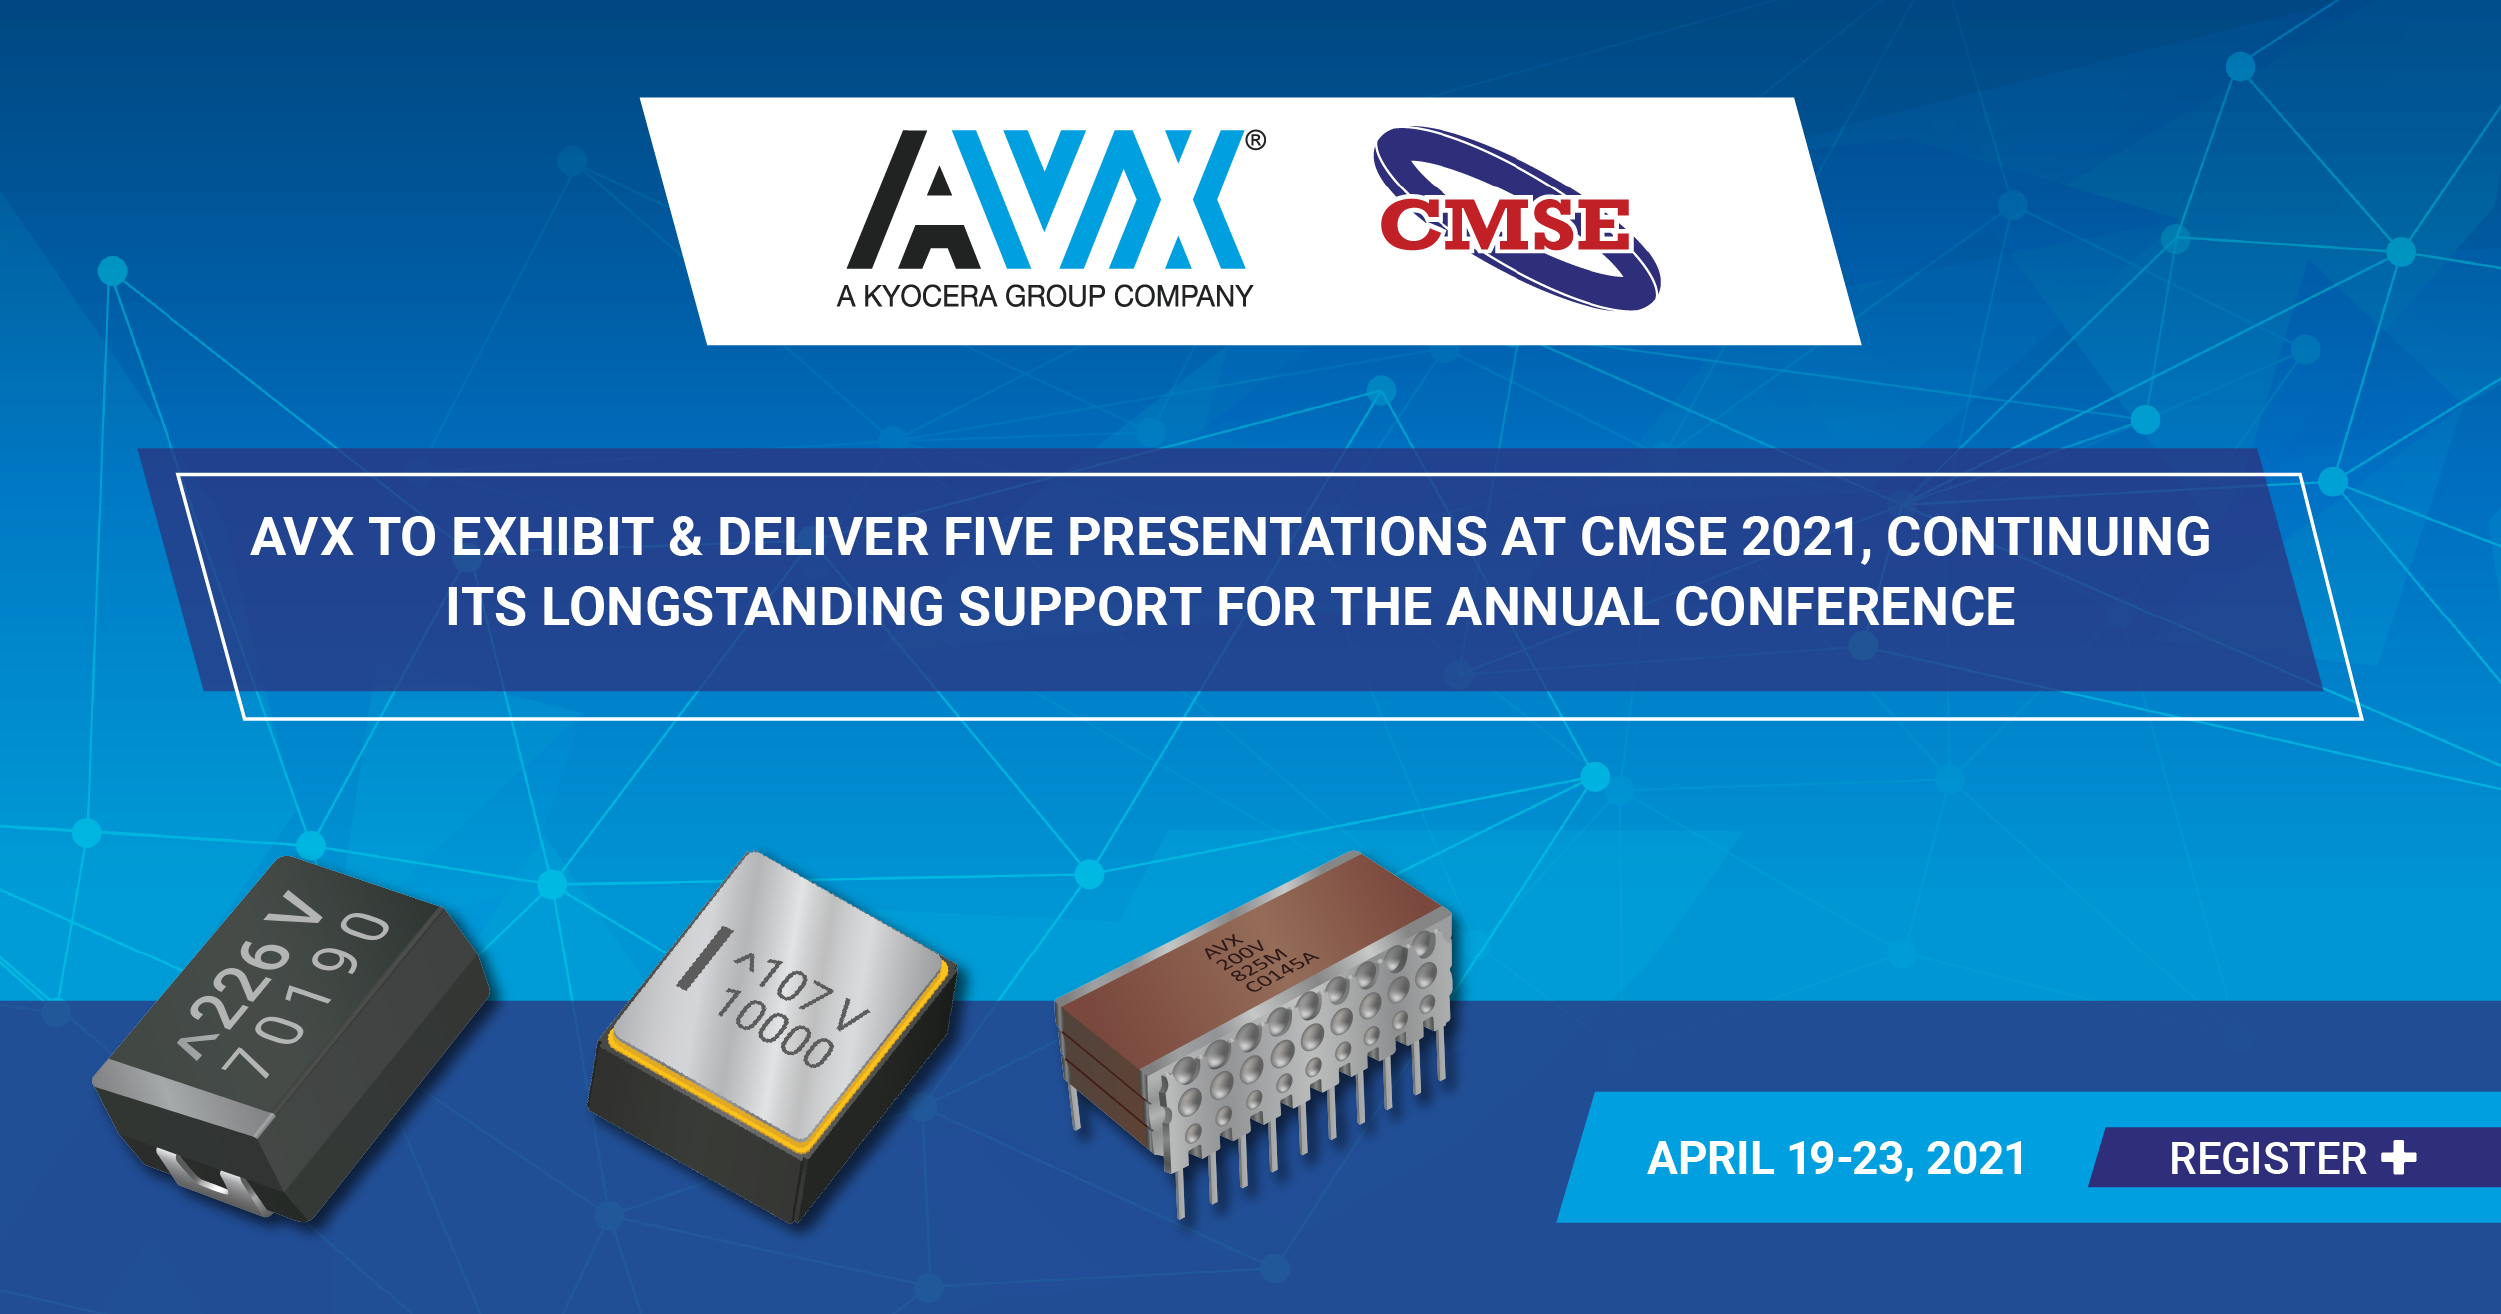 AVX to Exhibit & Deliver Five Presentations at CMSE 2021, Continuing its Longstanding Support for the Annual Conference